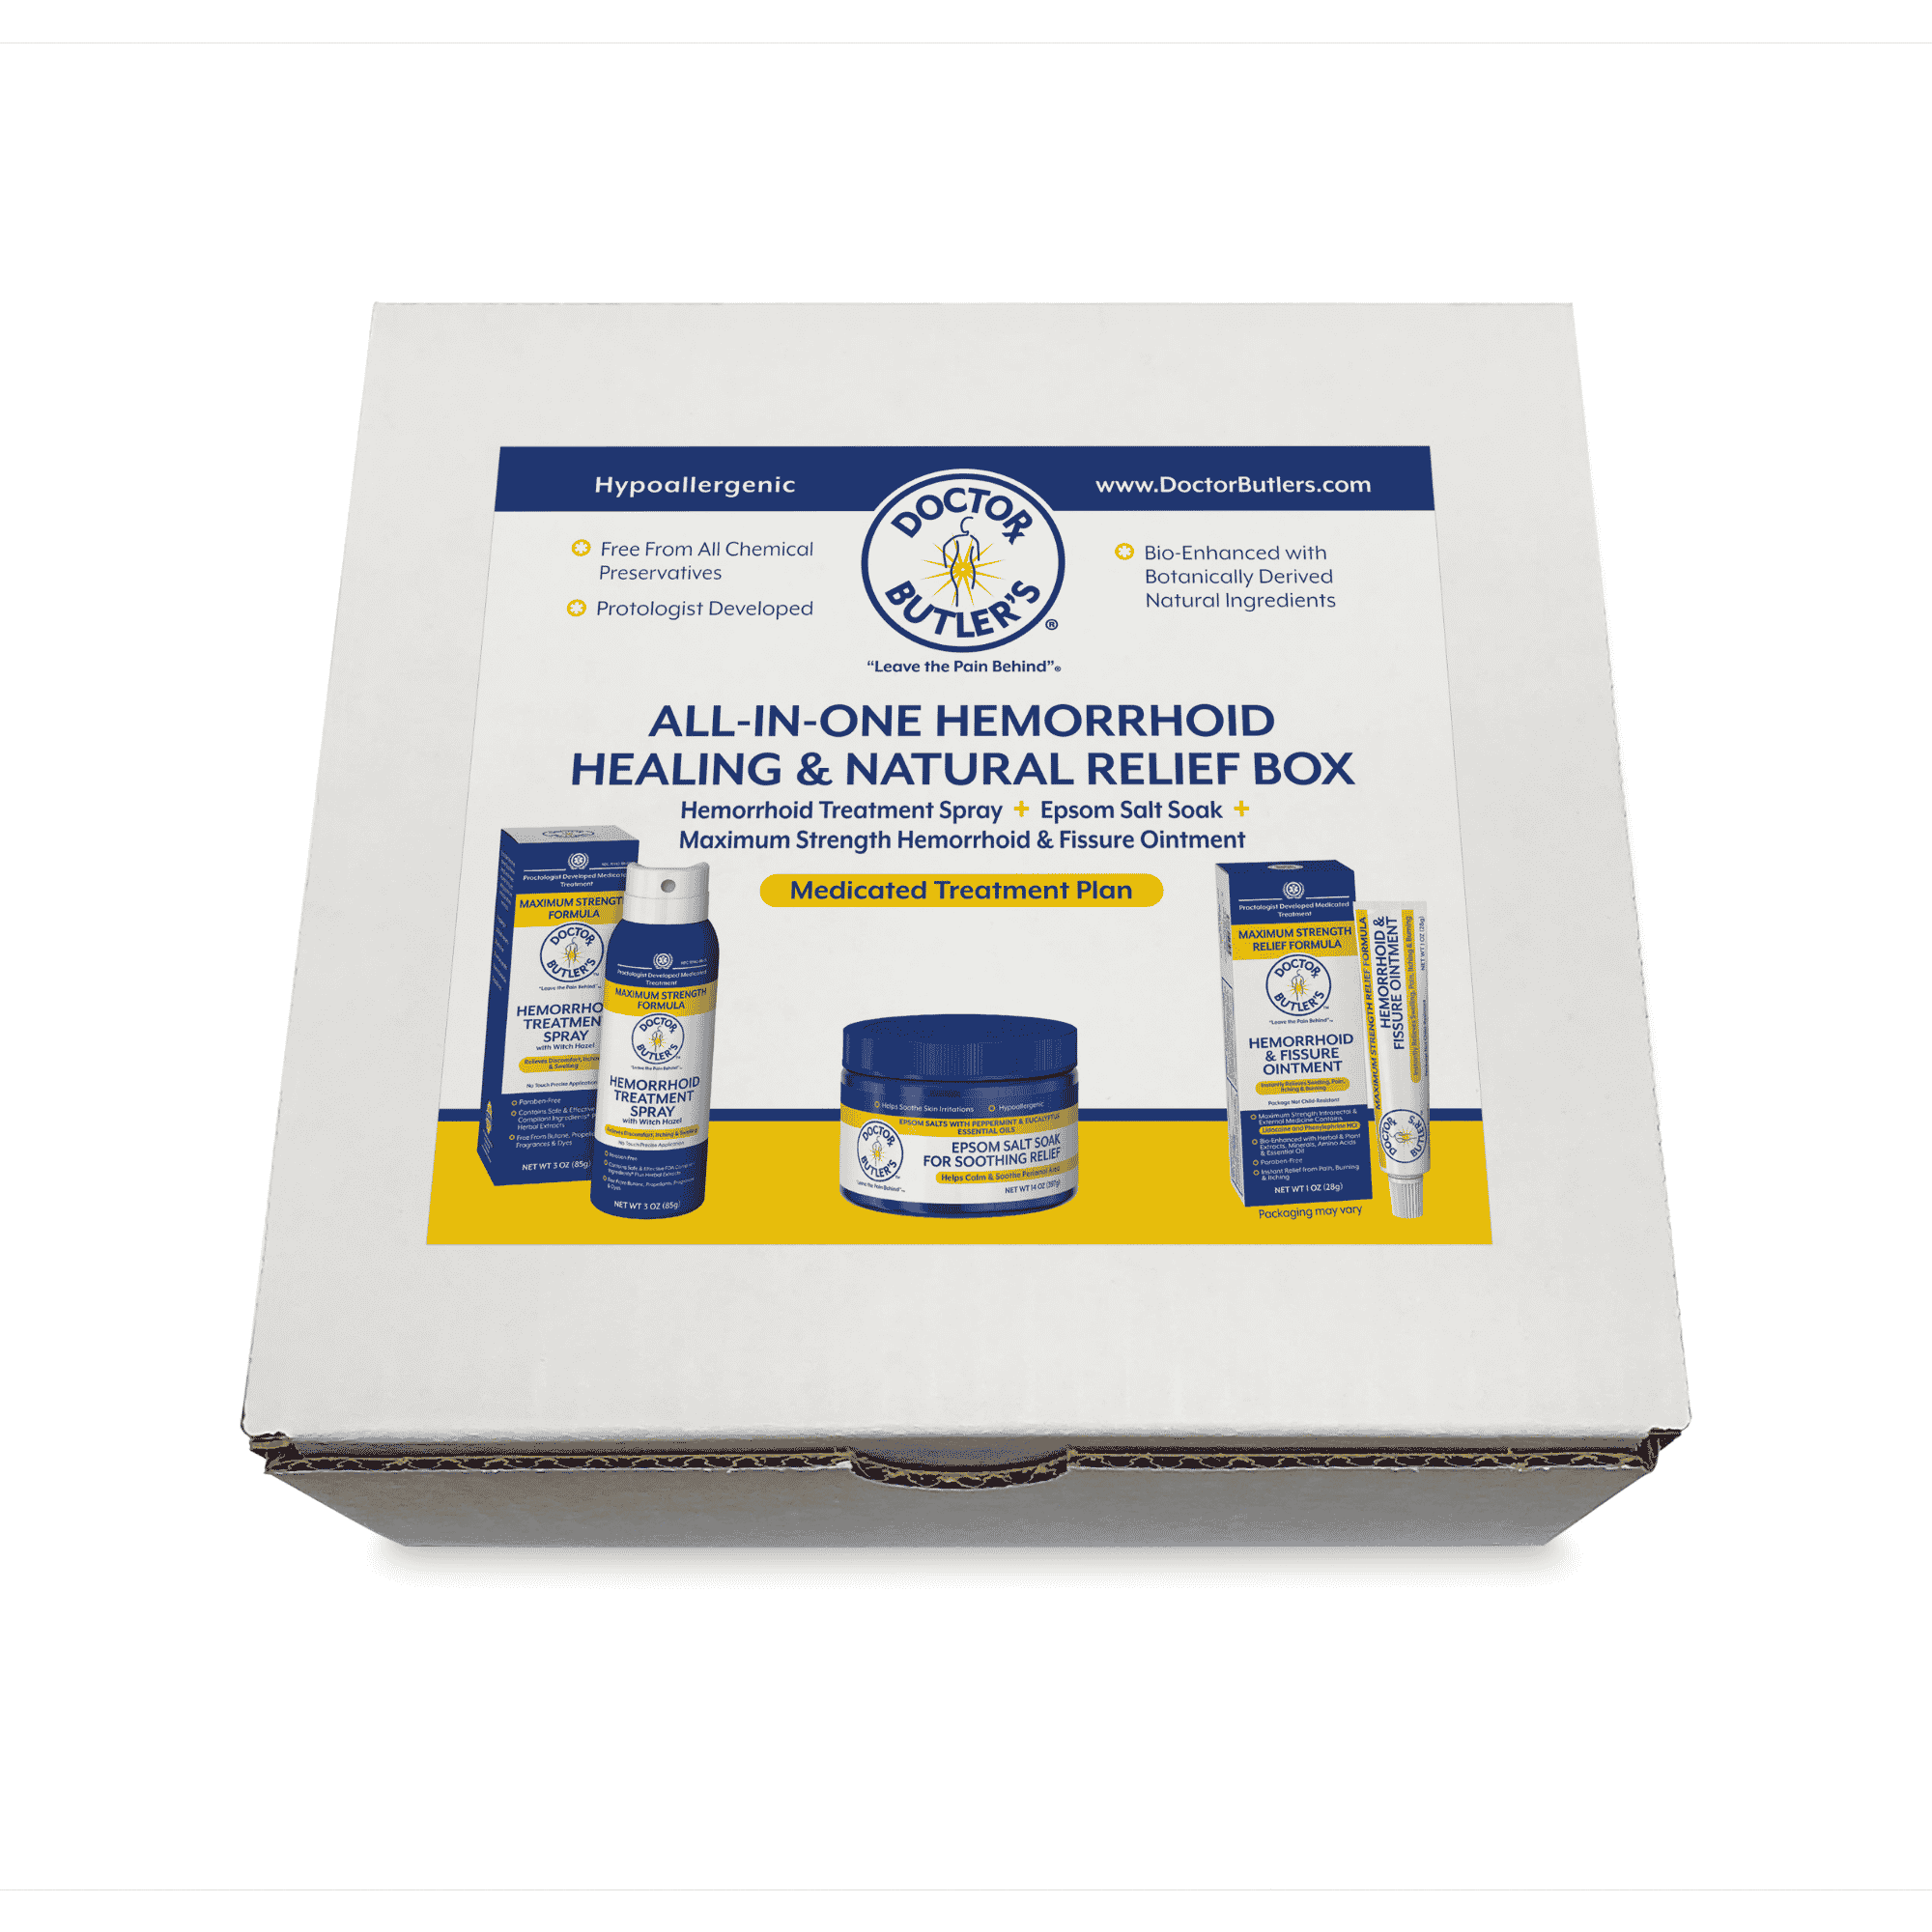 All-In-One Hemorrhoid Healing & Natural Relief Box by Doctor Butler's